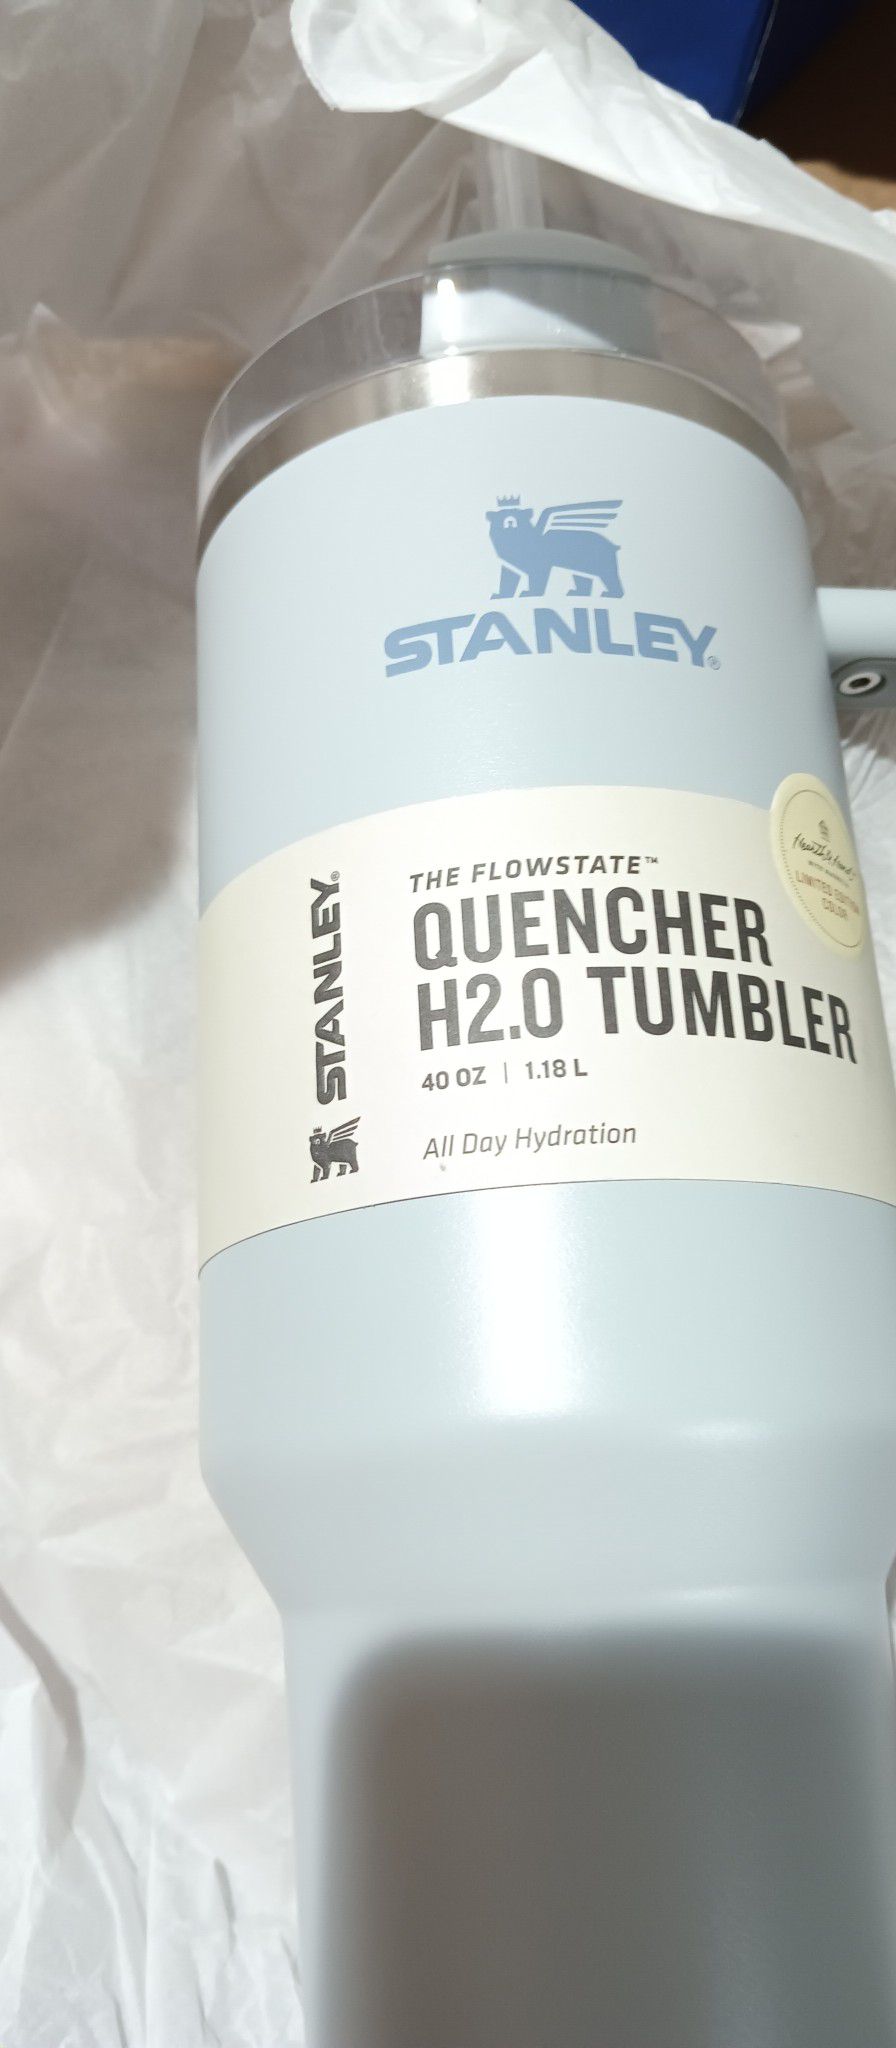 Stanley 

THE QUENCHER H2.0 TUMBLER | 40 OZ

